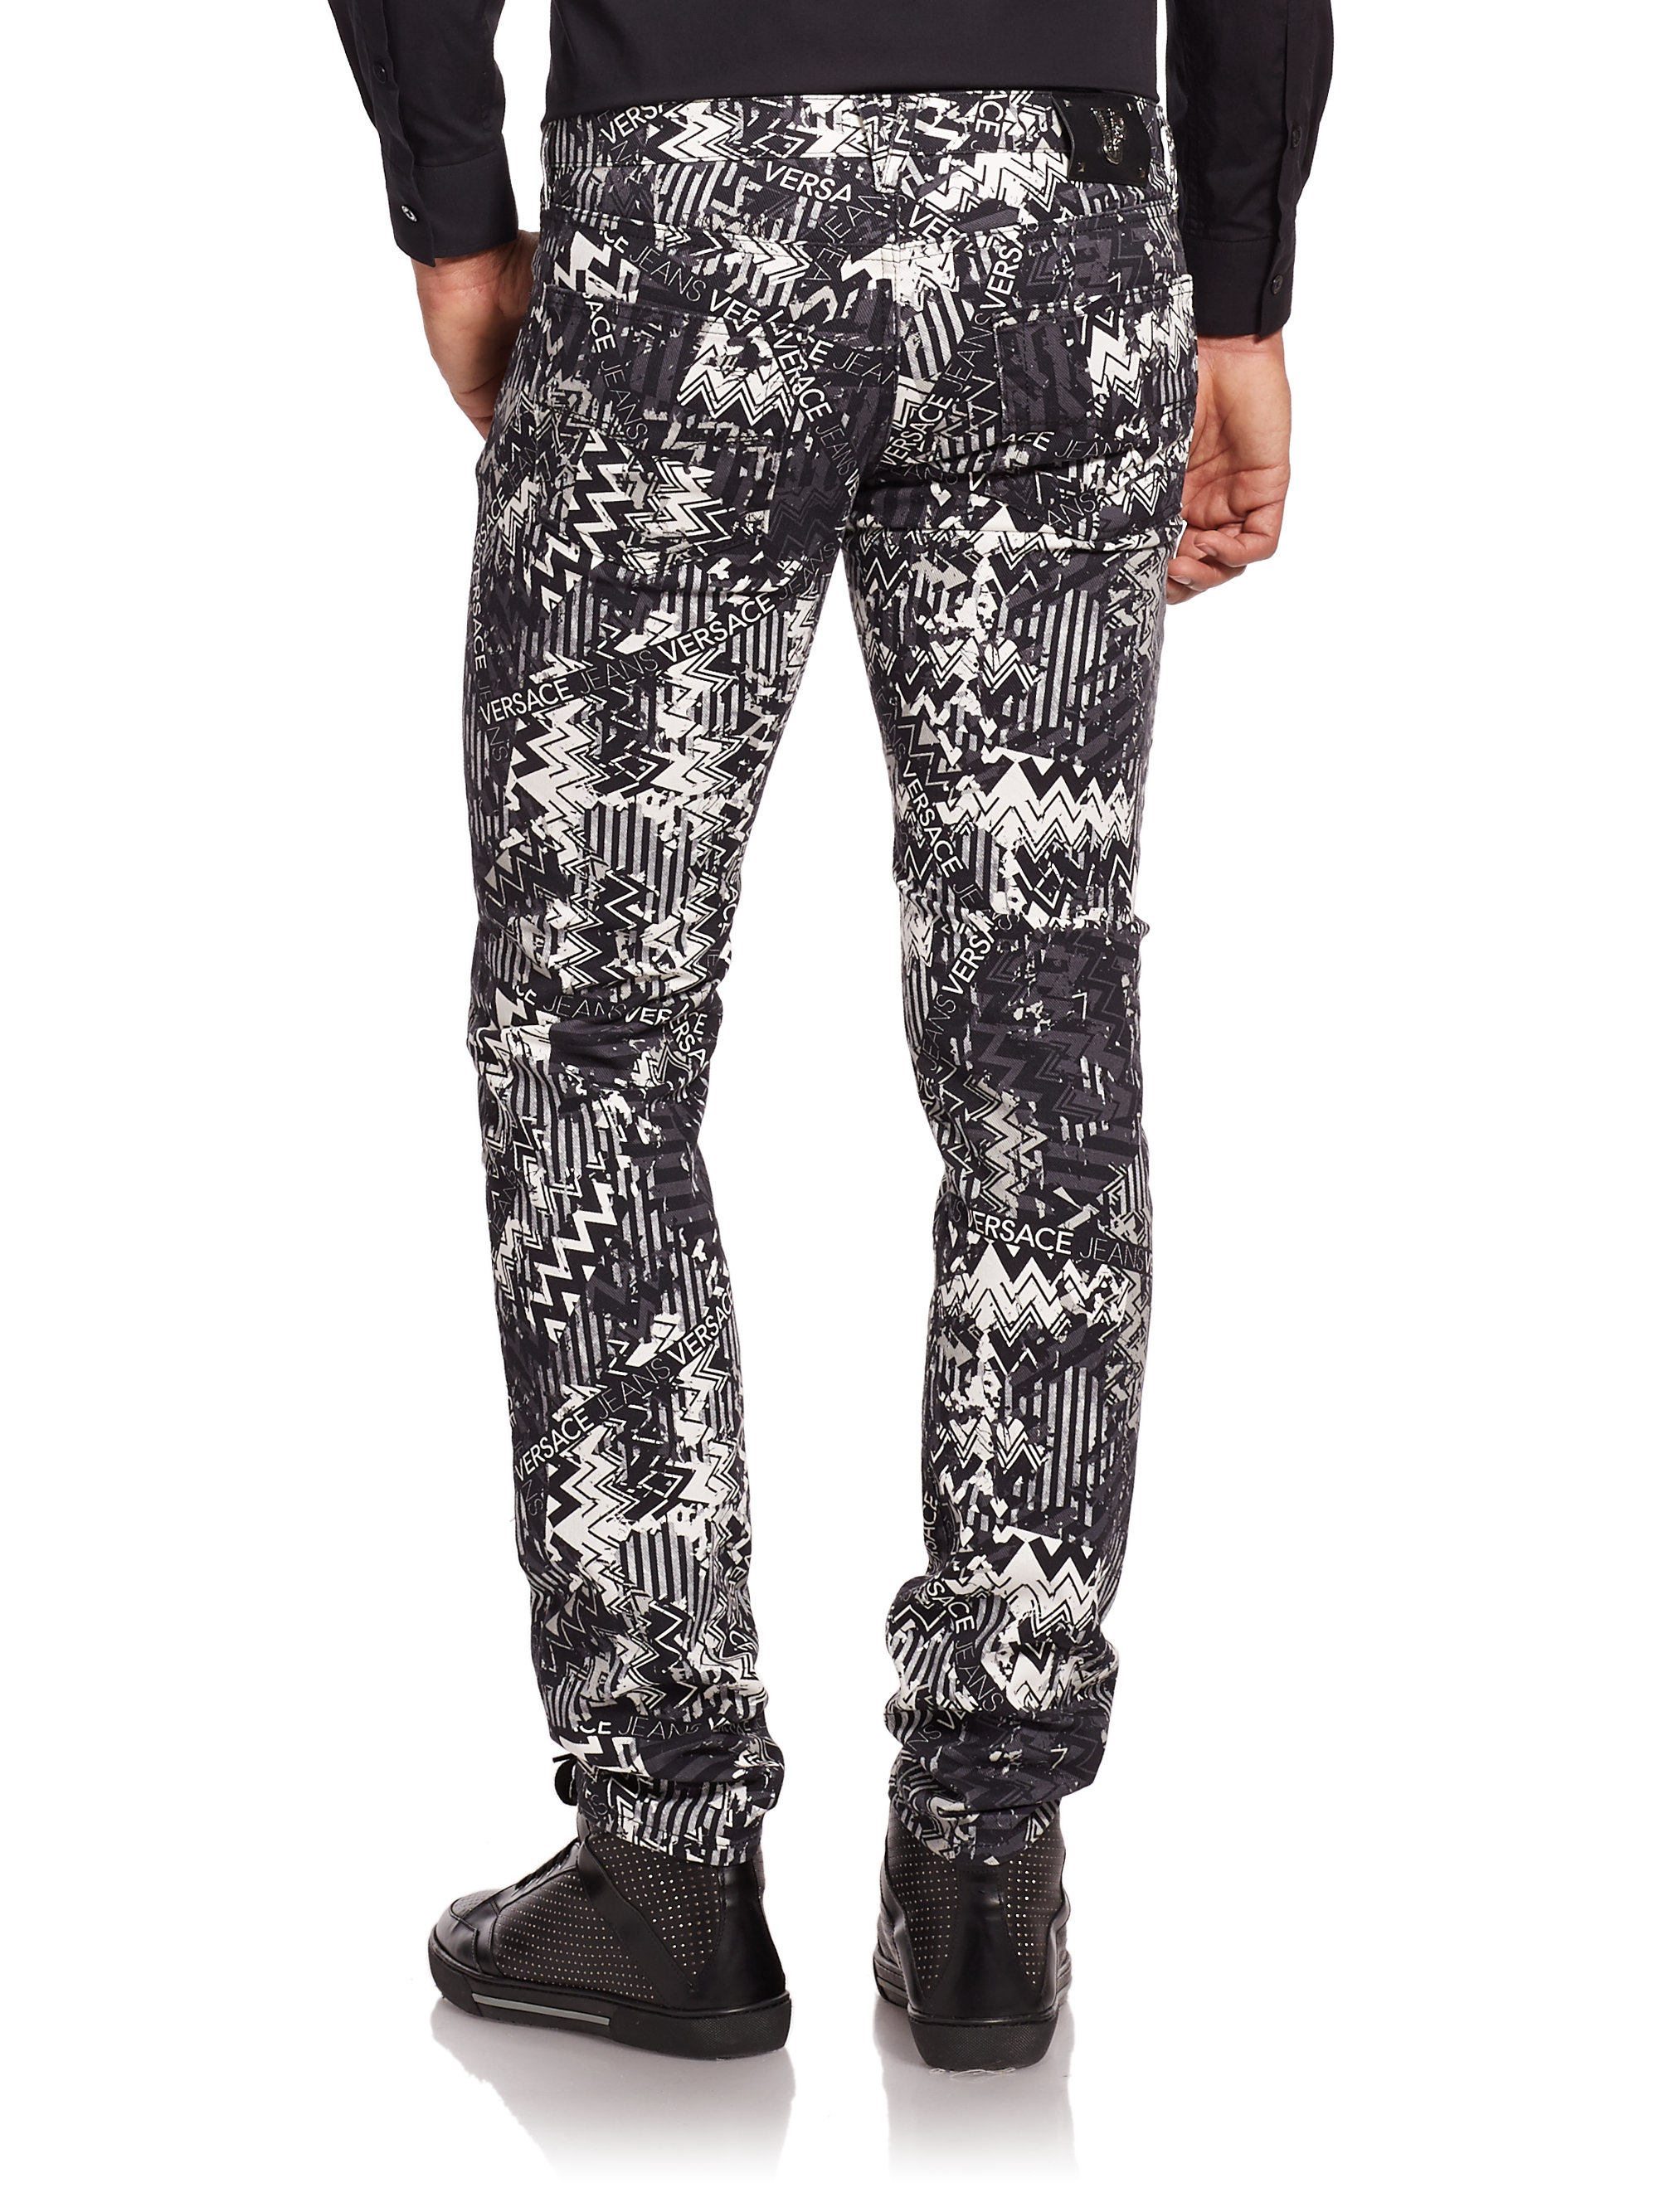 Lyst - Versace Jeans Skinny Print Jeans in White for Men